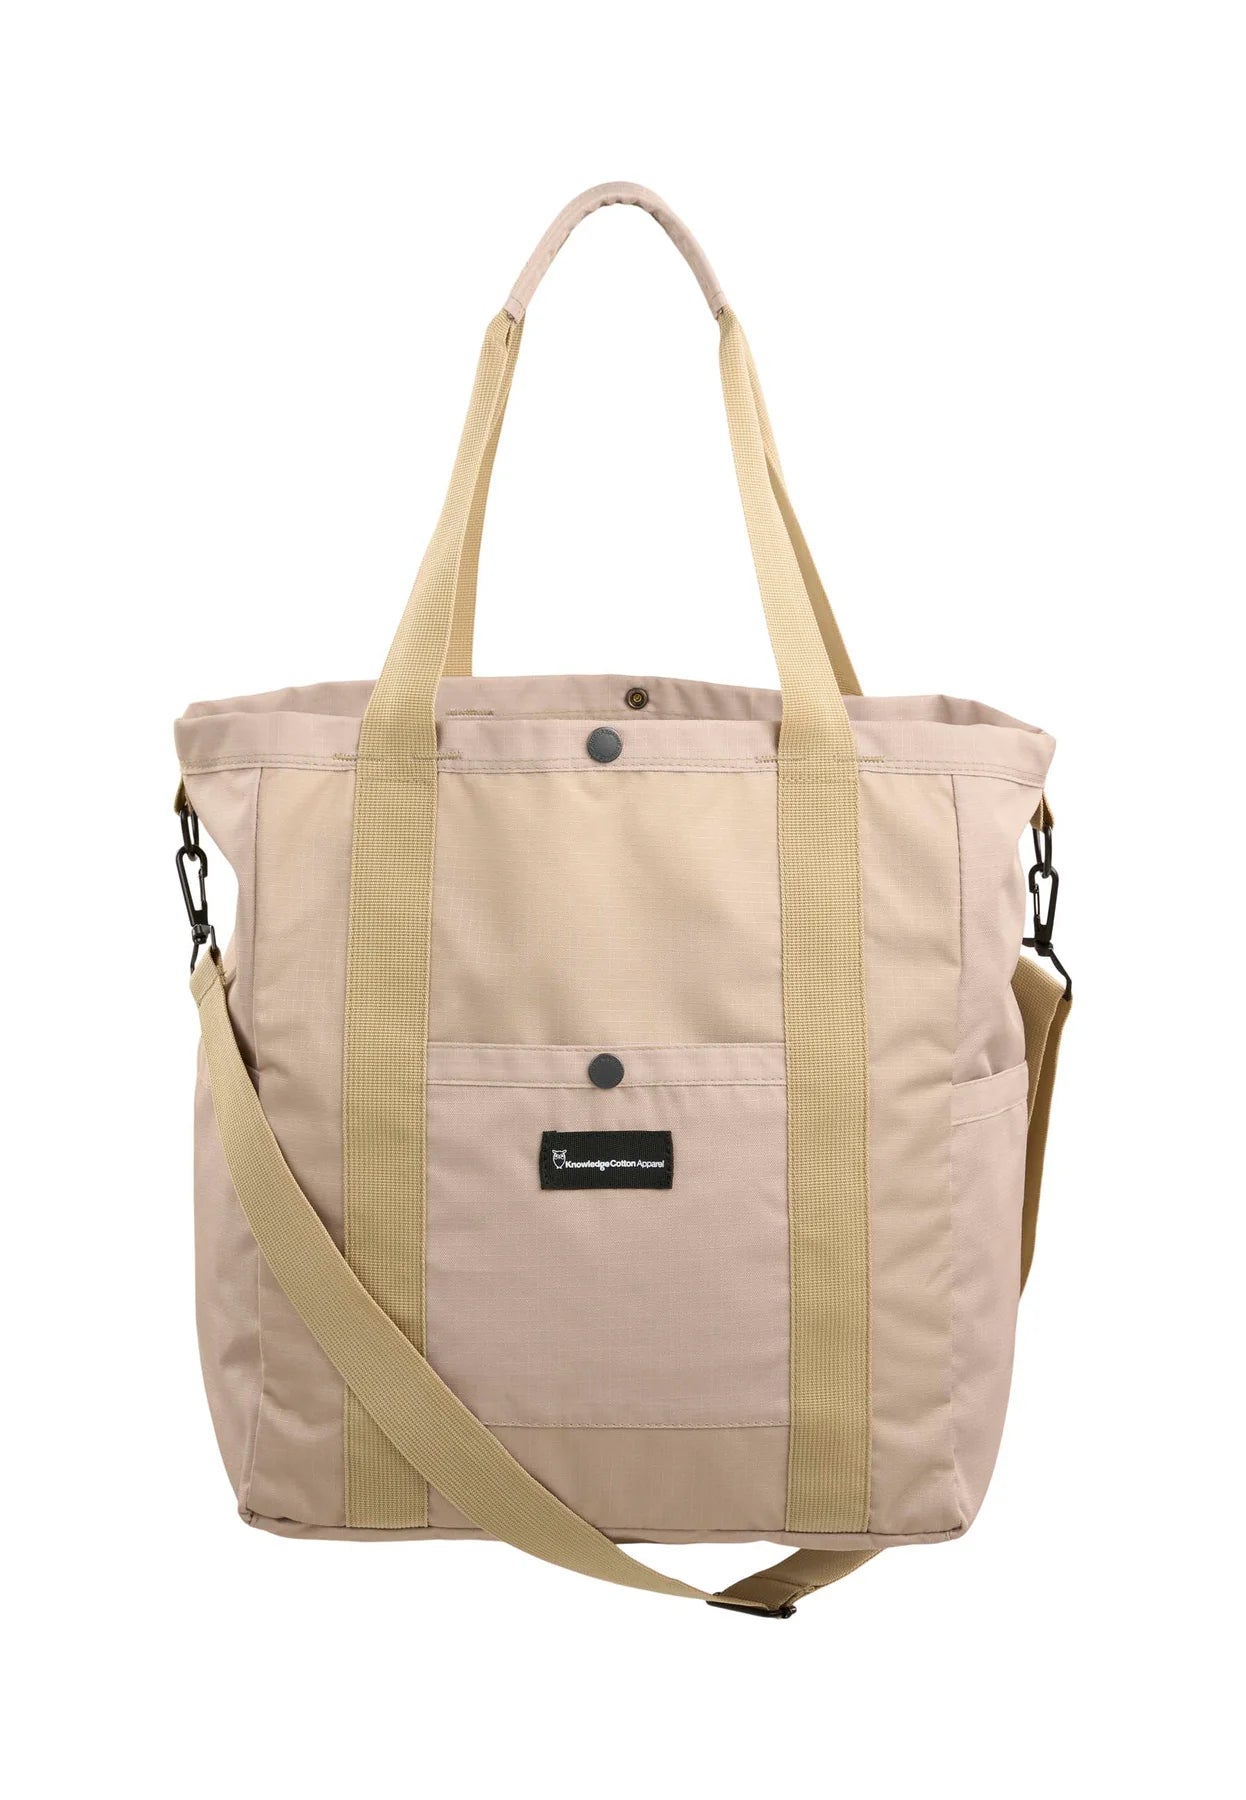 KnowledgeCotton Apparel - Big Tote Pack with Shoulderstrap - Recycled Polyester - Weekendbee - sustainable sportswear